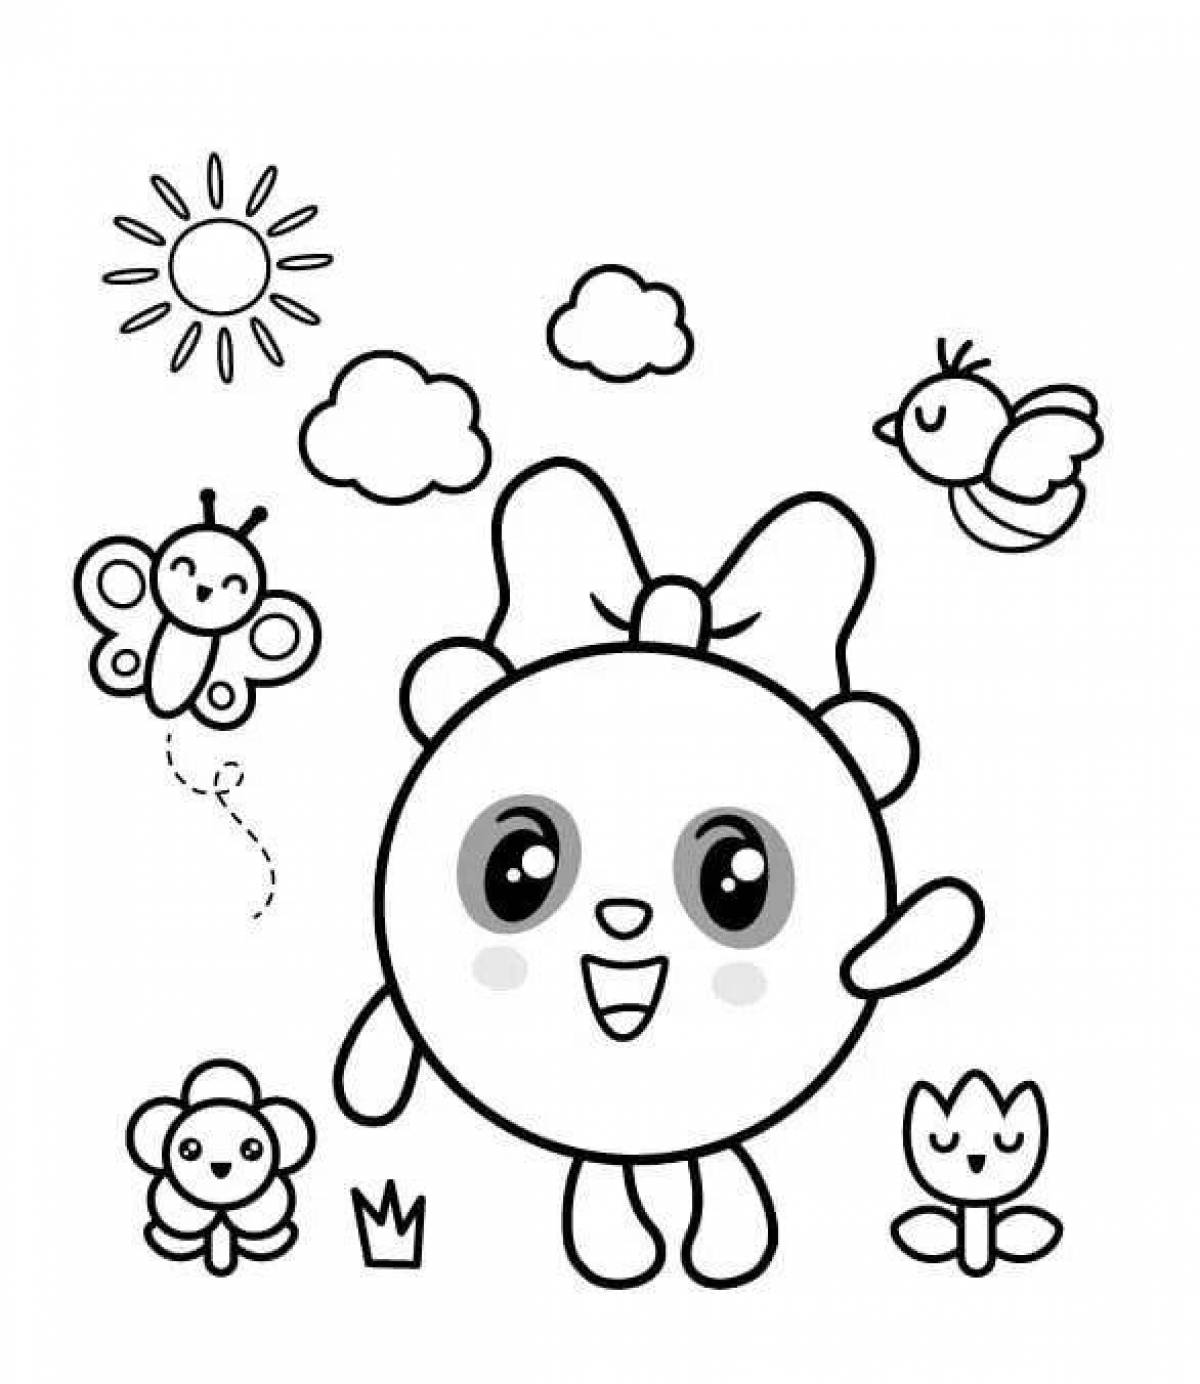 Creative coloring game for kids